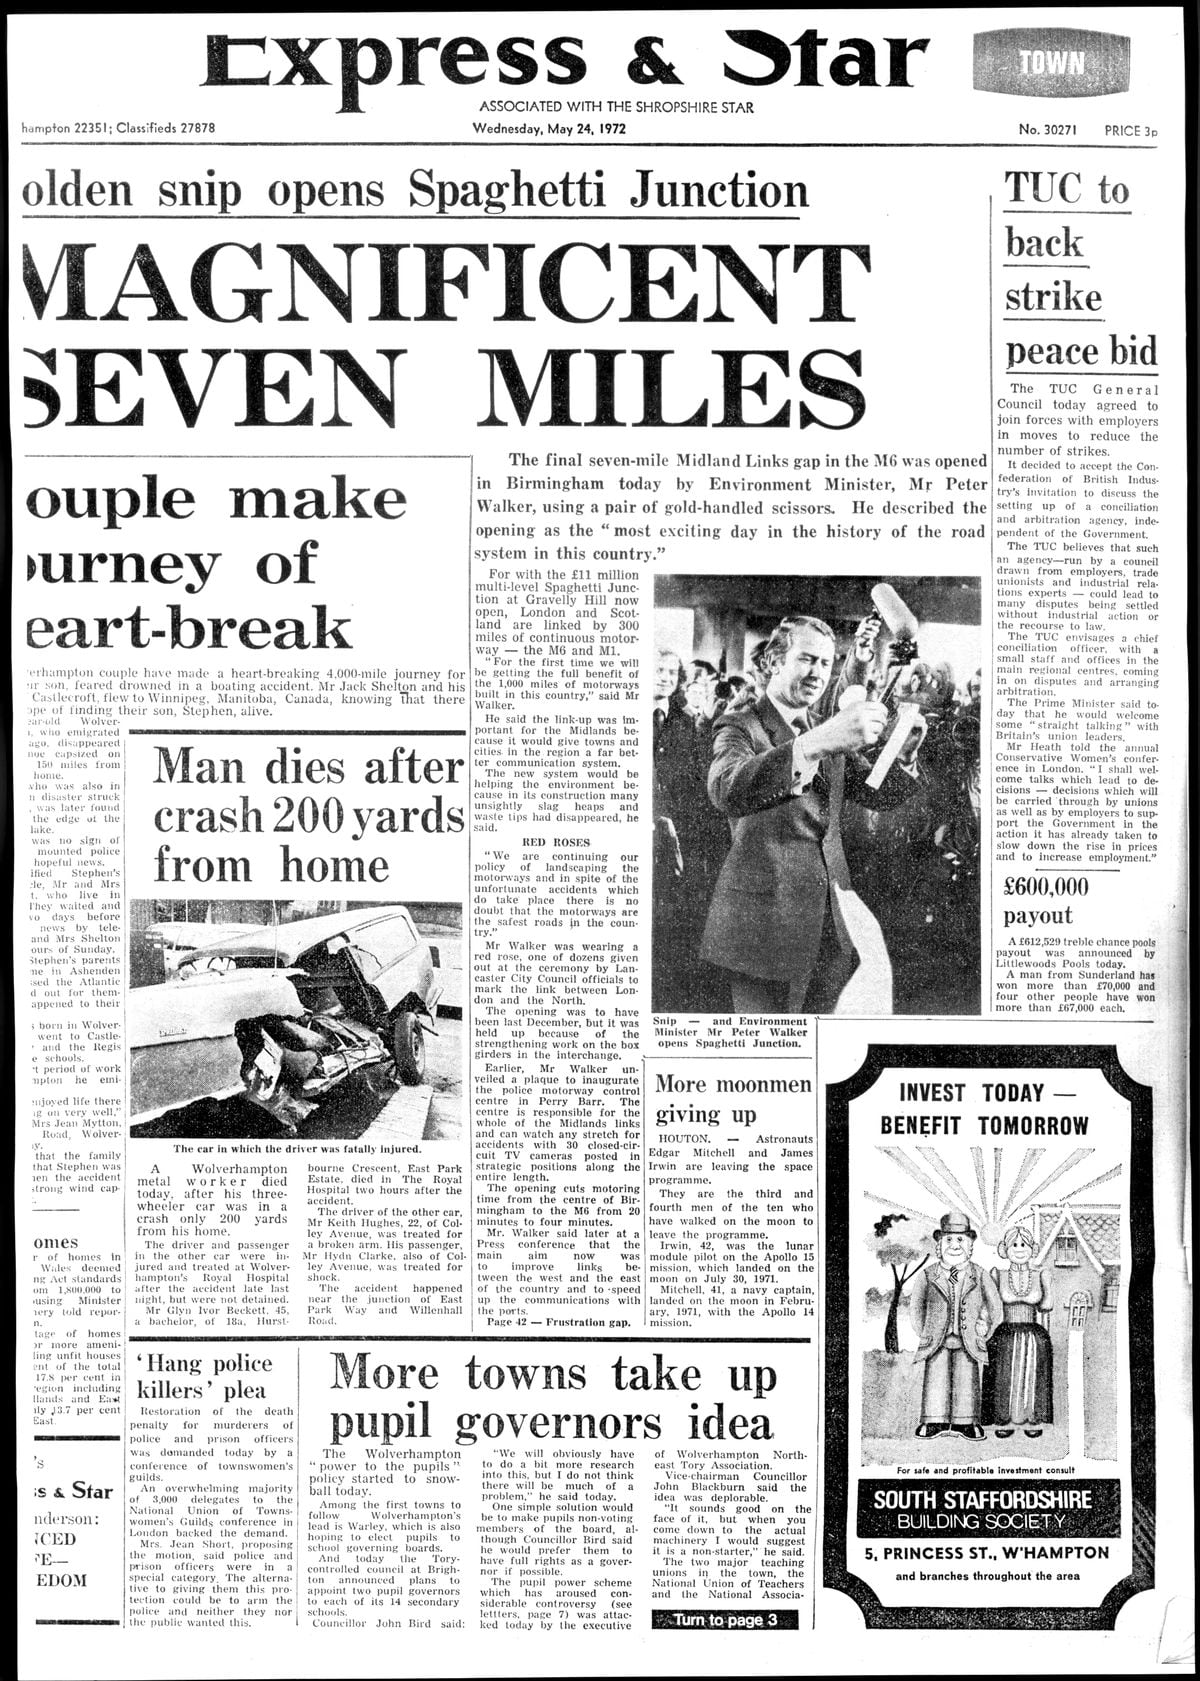 How the Express & Star reported the opening of Spaghetti Junction